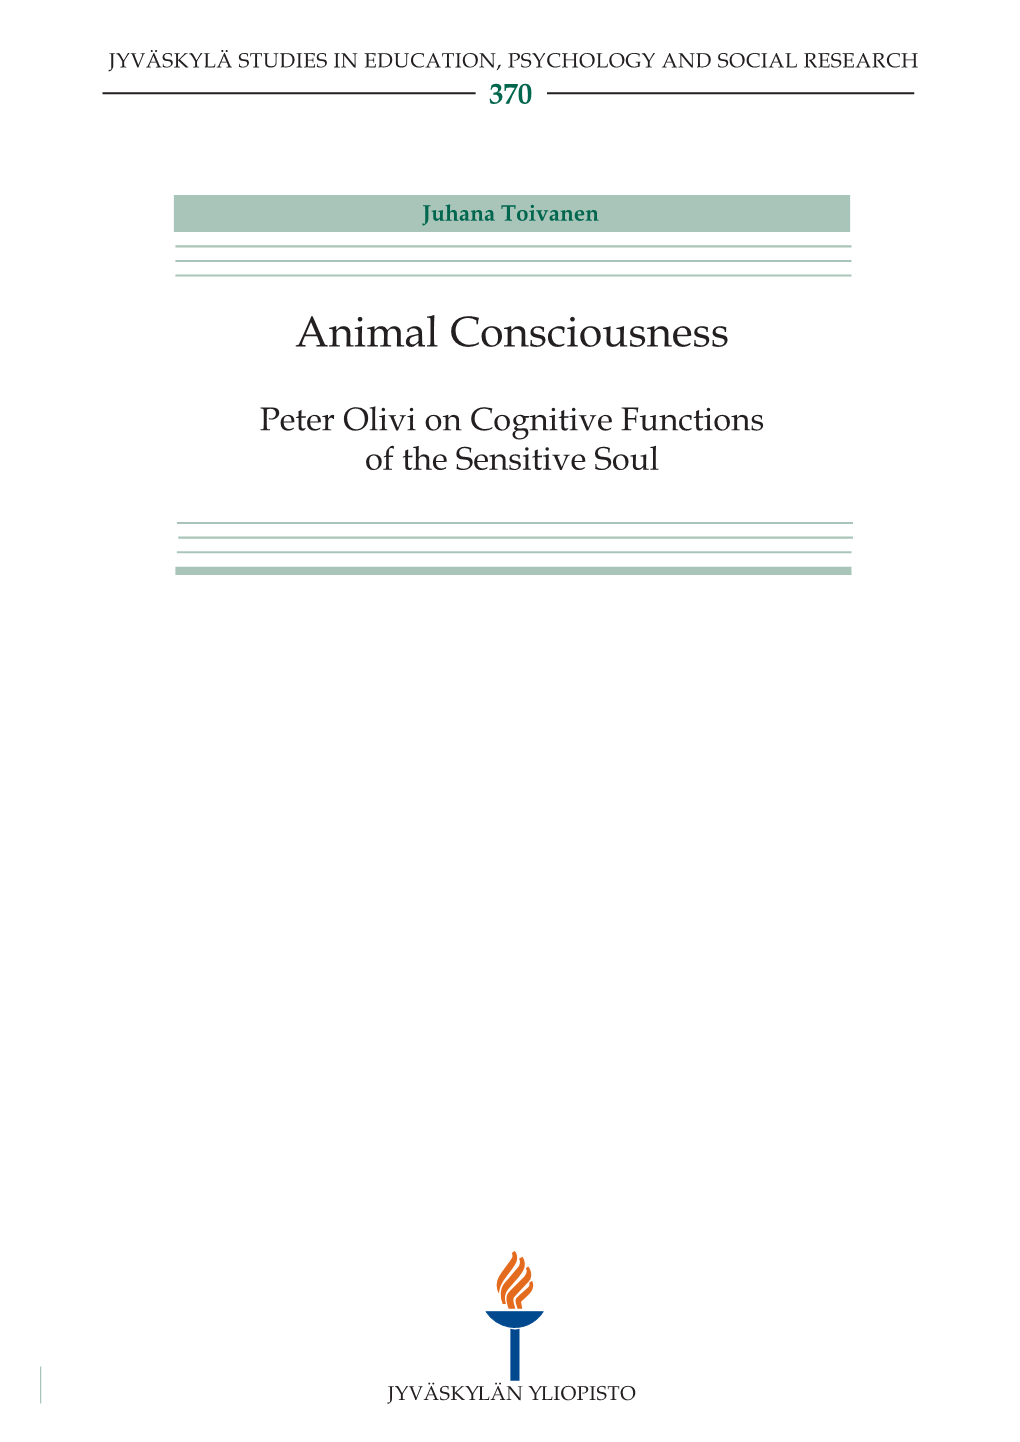 Animal Consciousness. Peter Olivi on Cognitive Functions of the Sensitive Soul